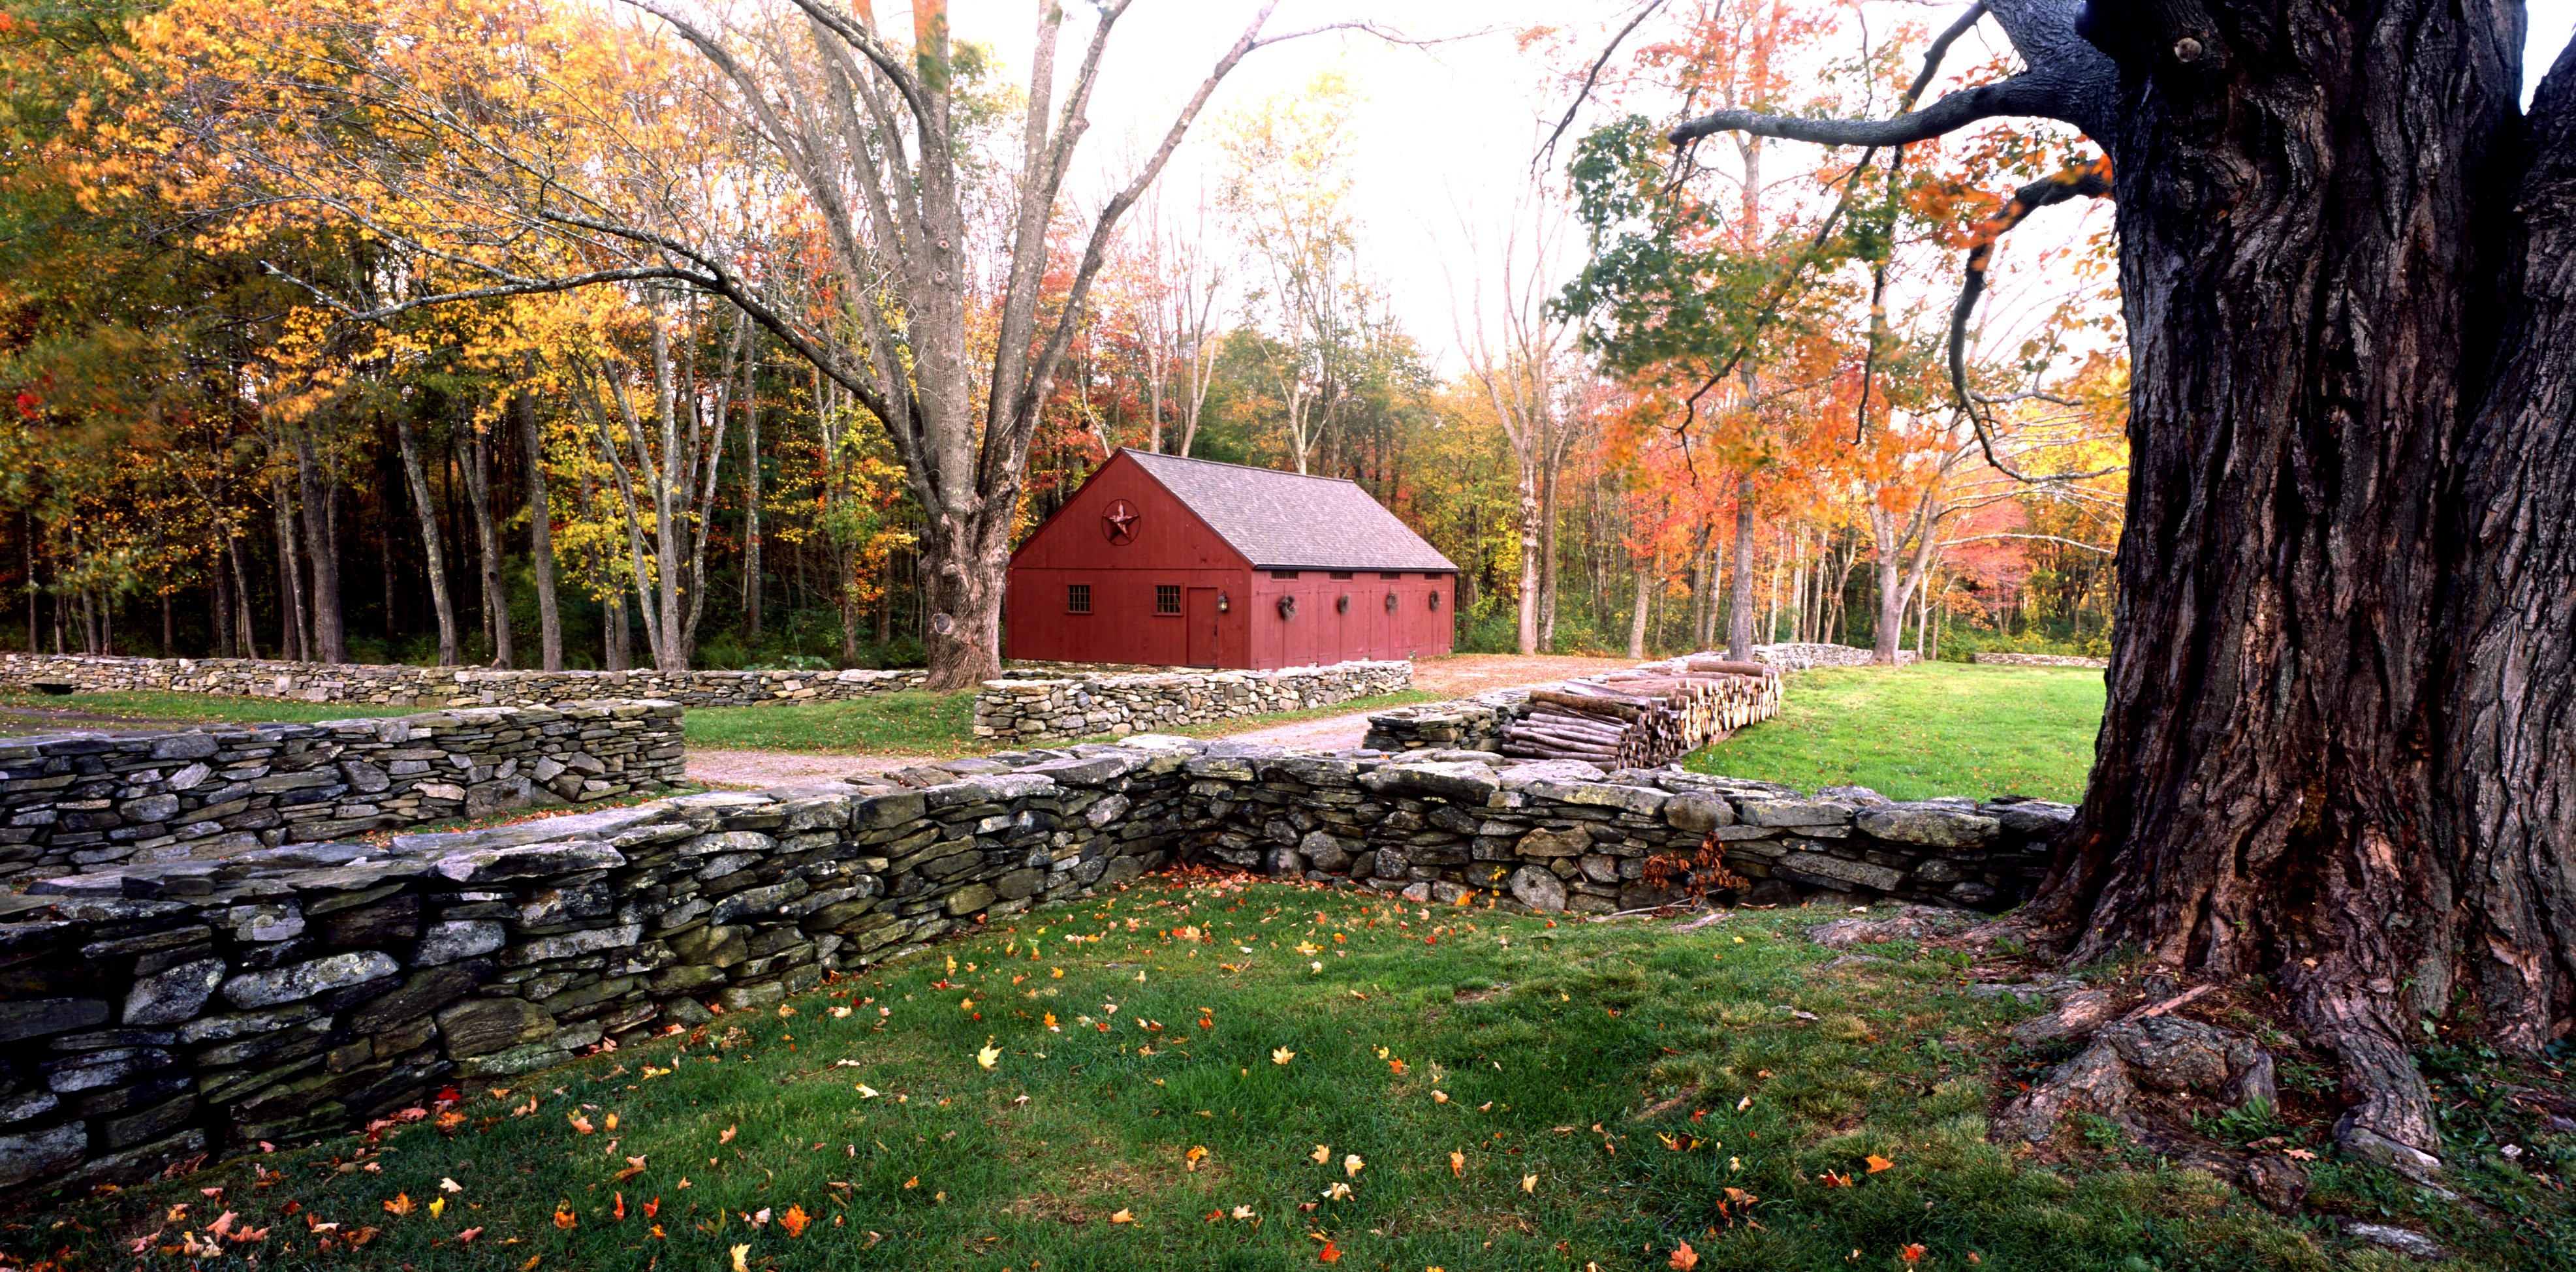 Panoramic images of New England